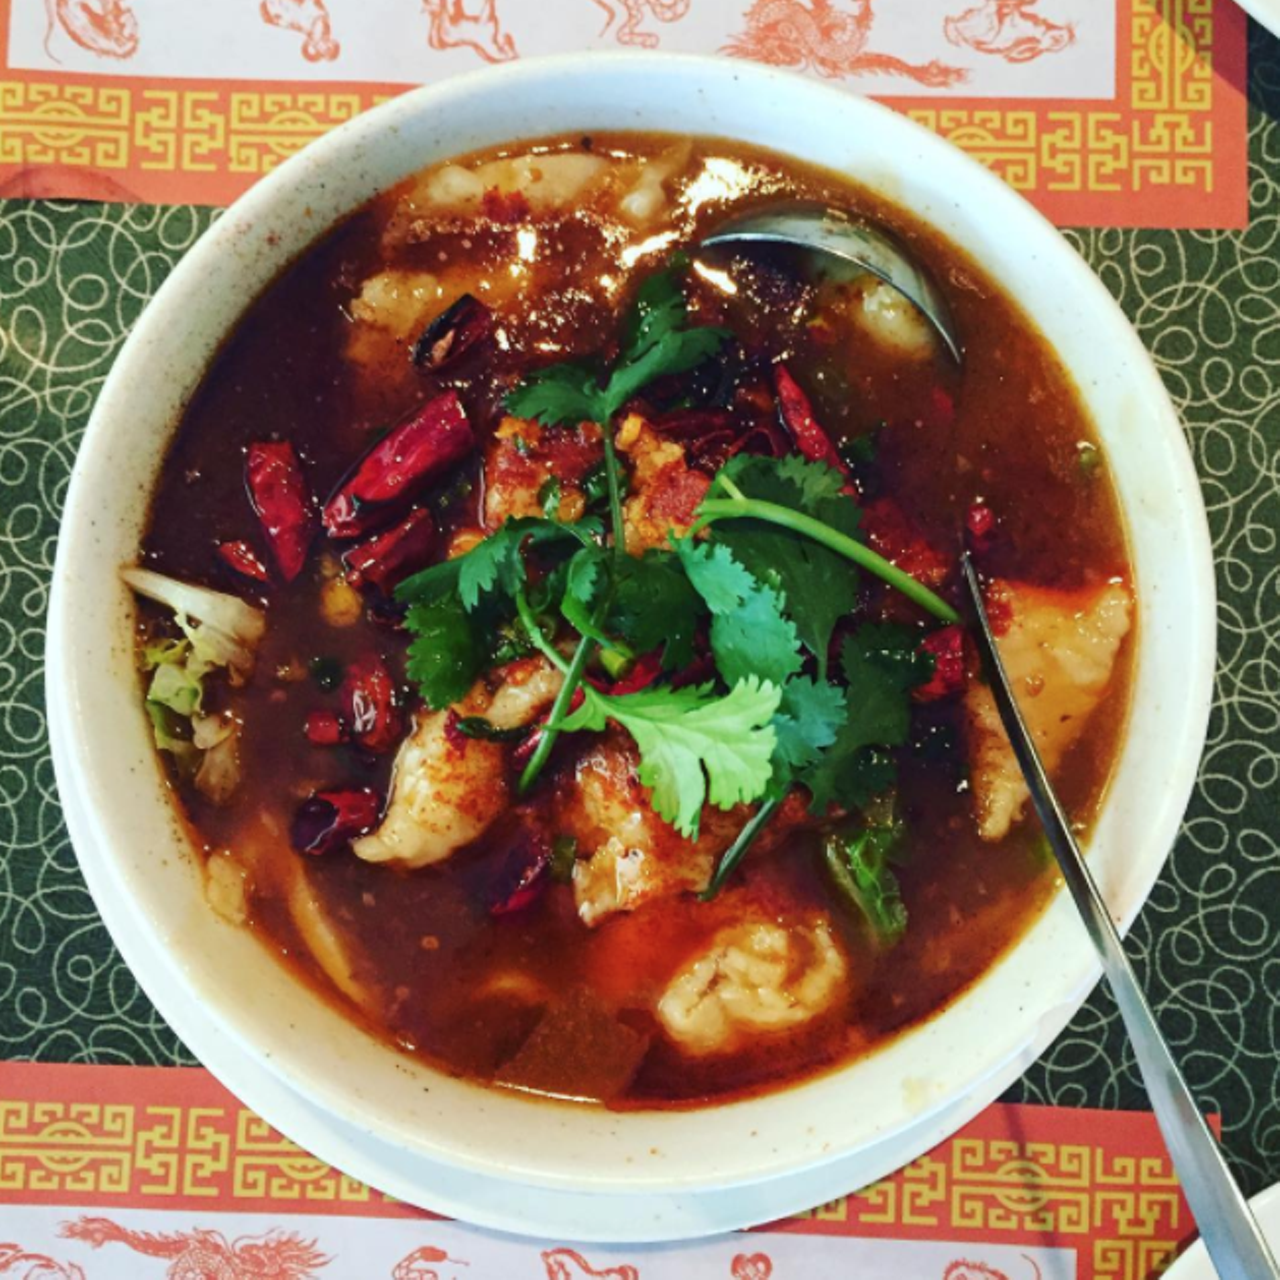 We Have Sinfully Delicious Chinese Food
Tang’s St., Sichuan Cuisine helped expand people’s palates and helped welcome a new wave of Chinese eateries in San Antonio including Sichuan House on Ingram, and Ming’s Thing.
Photo via Instagram, medfoodie